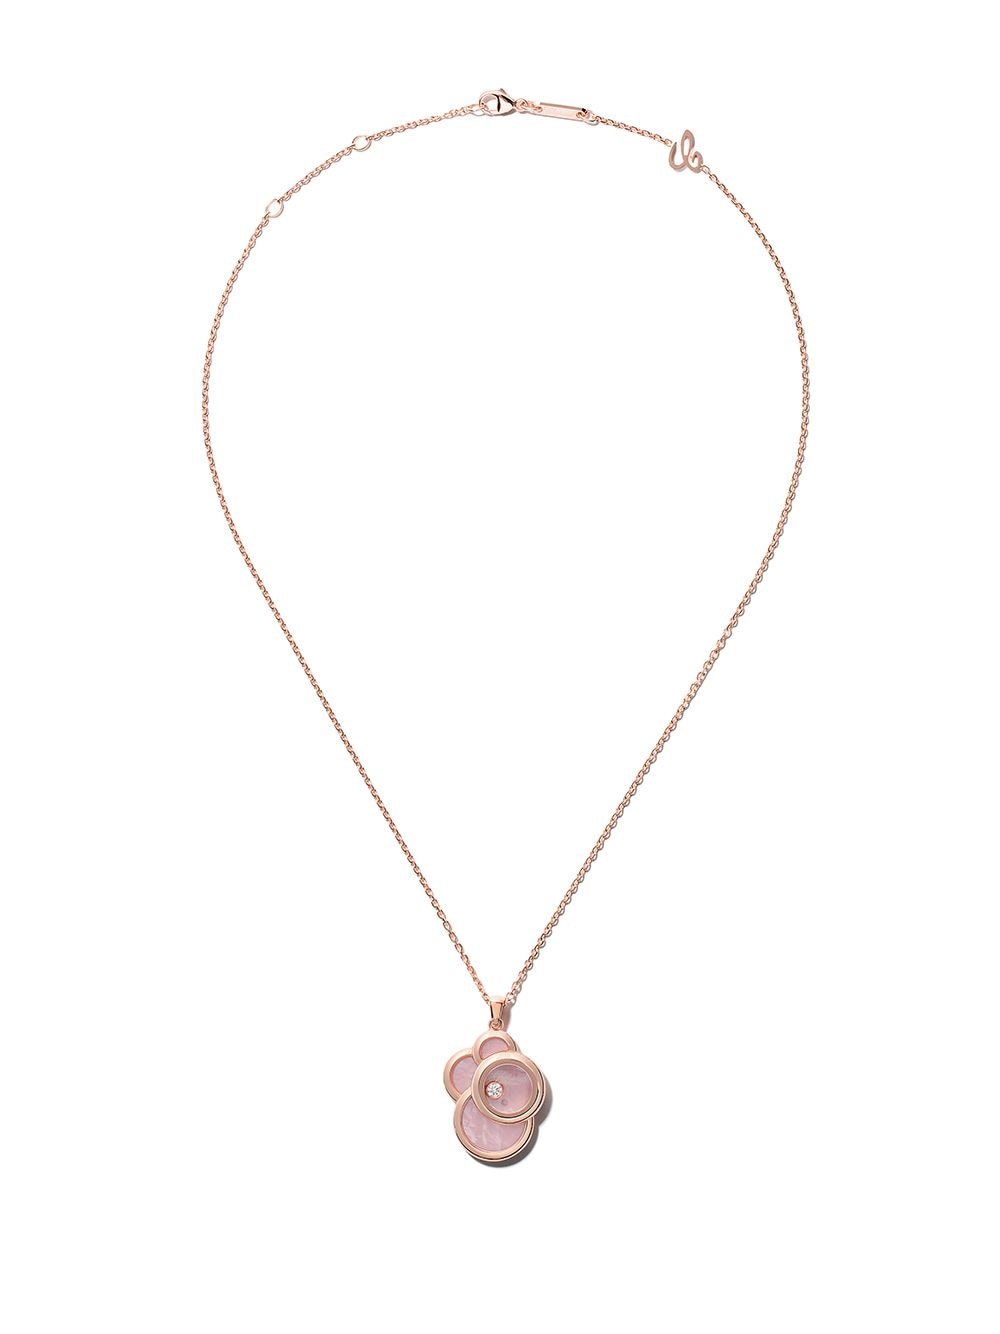 Chopard 18kt rose gold Happy Dreams pink mother-of-pearl and diamond pendant necklace